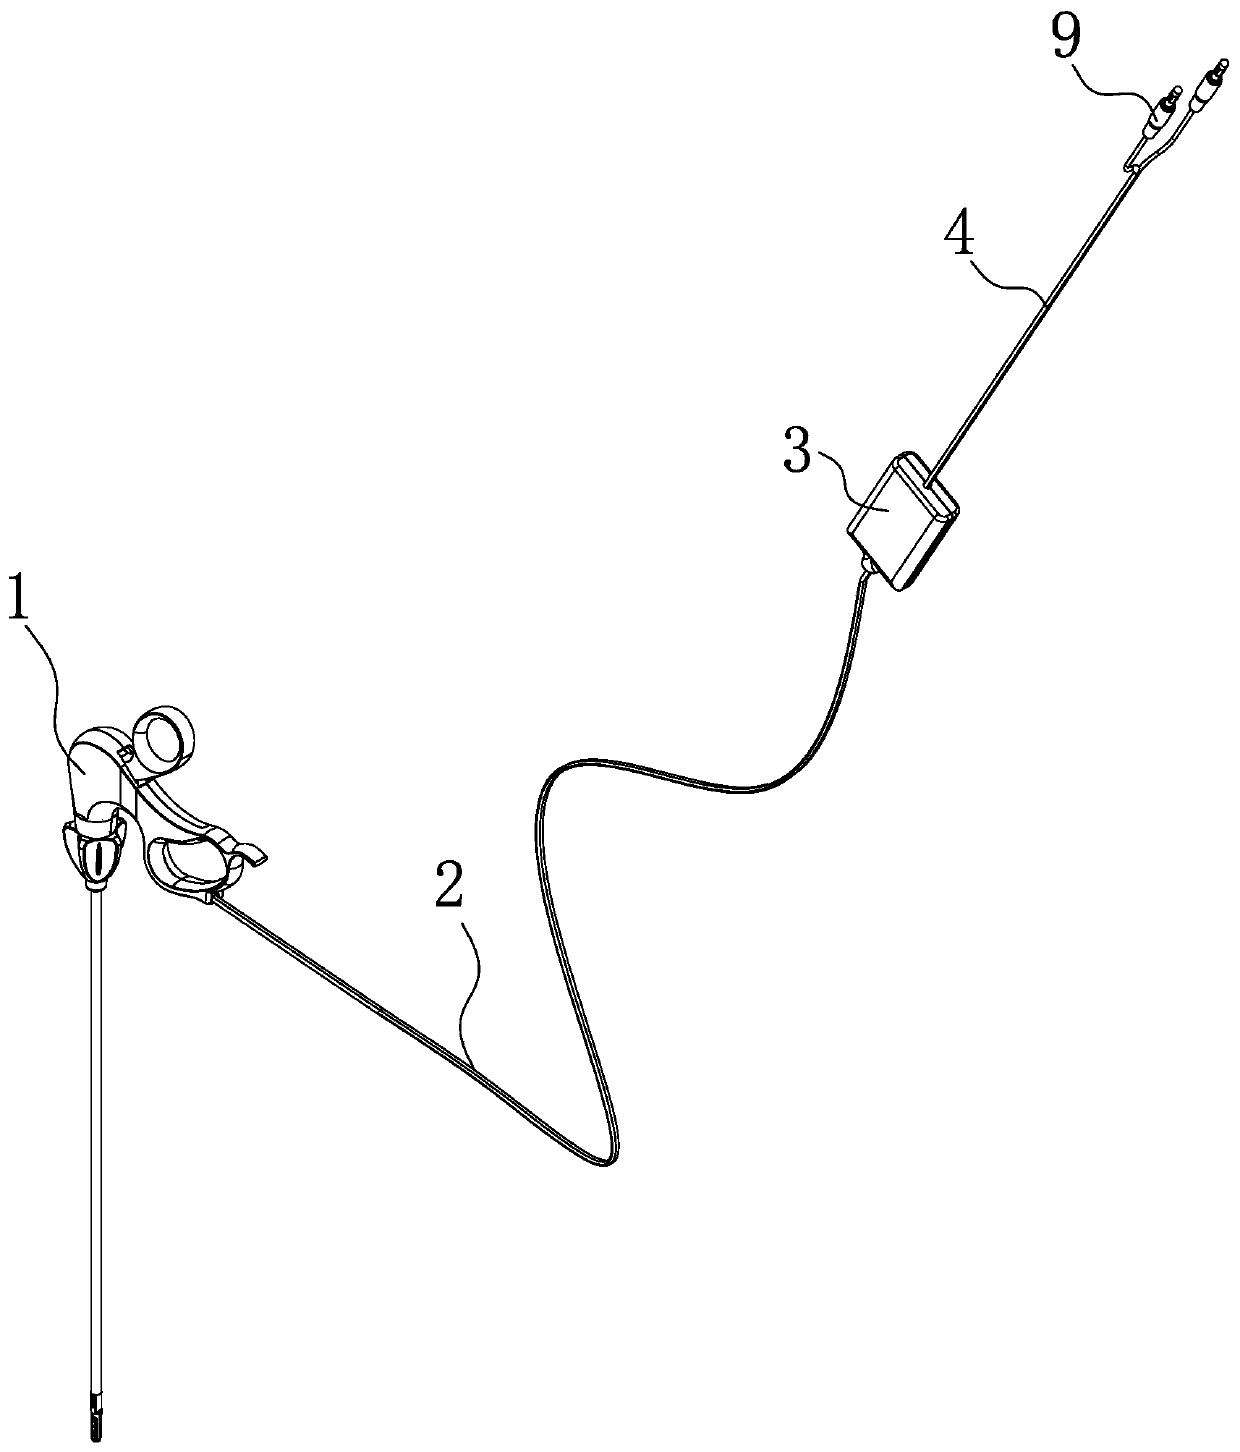 Bipolar electric coagulation forceps with time delay switch